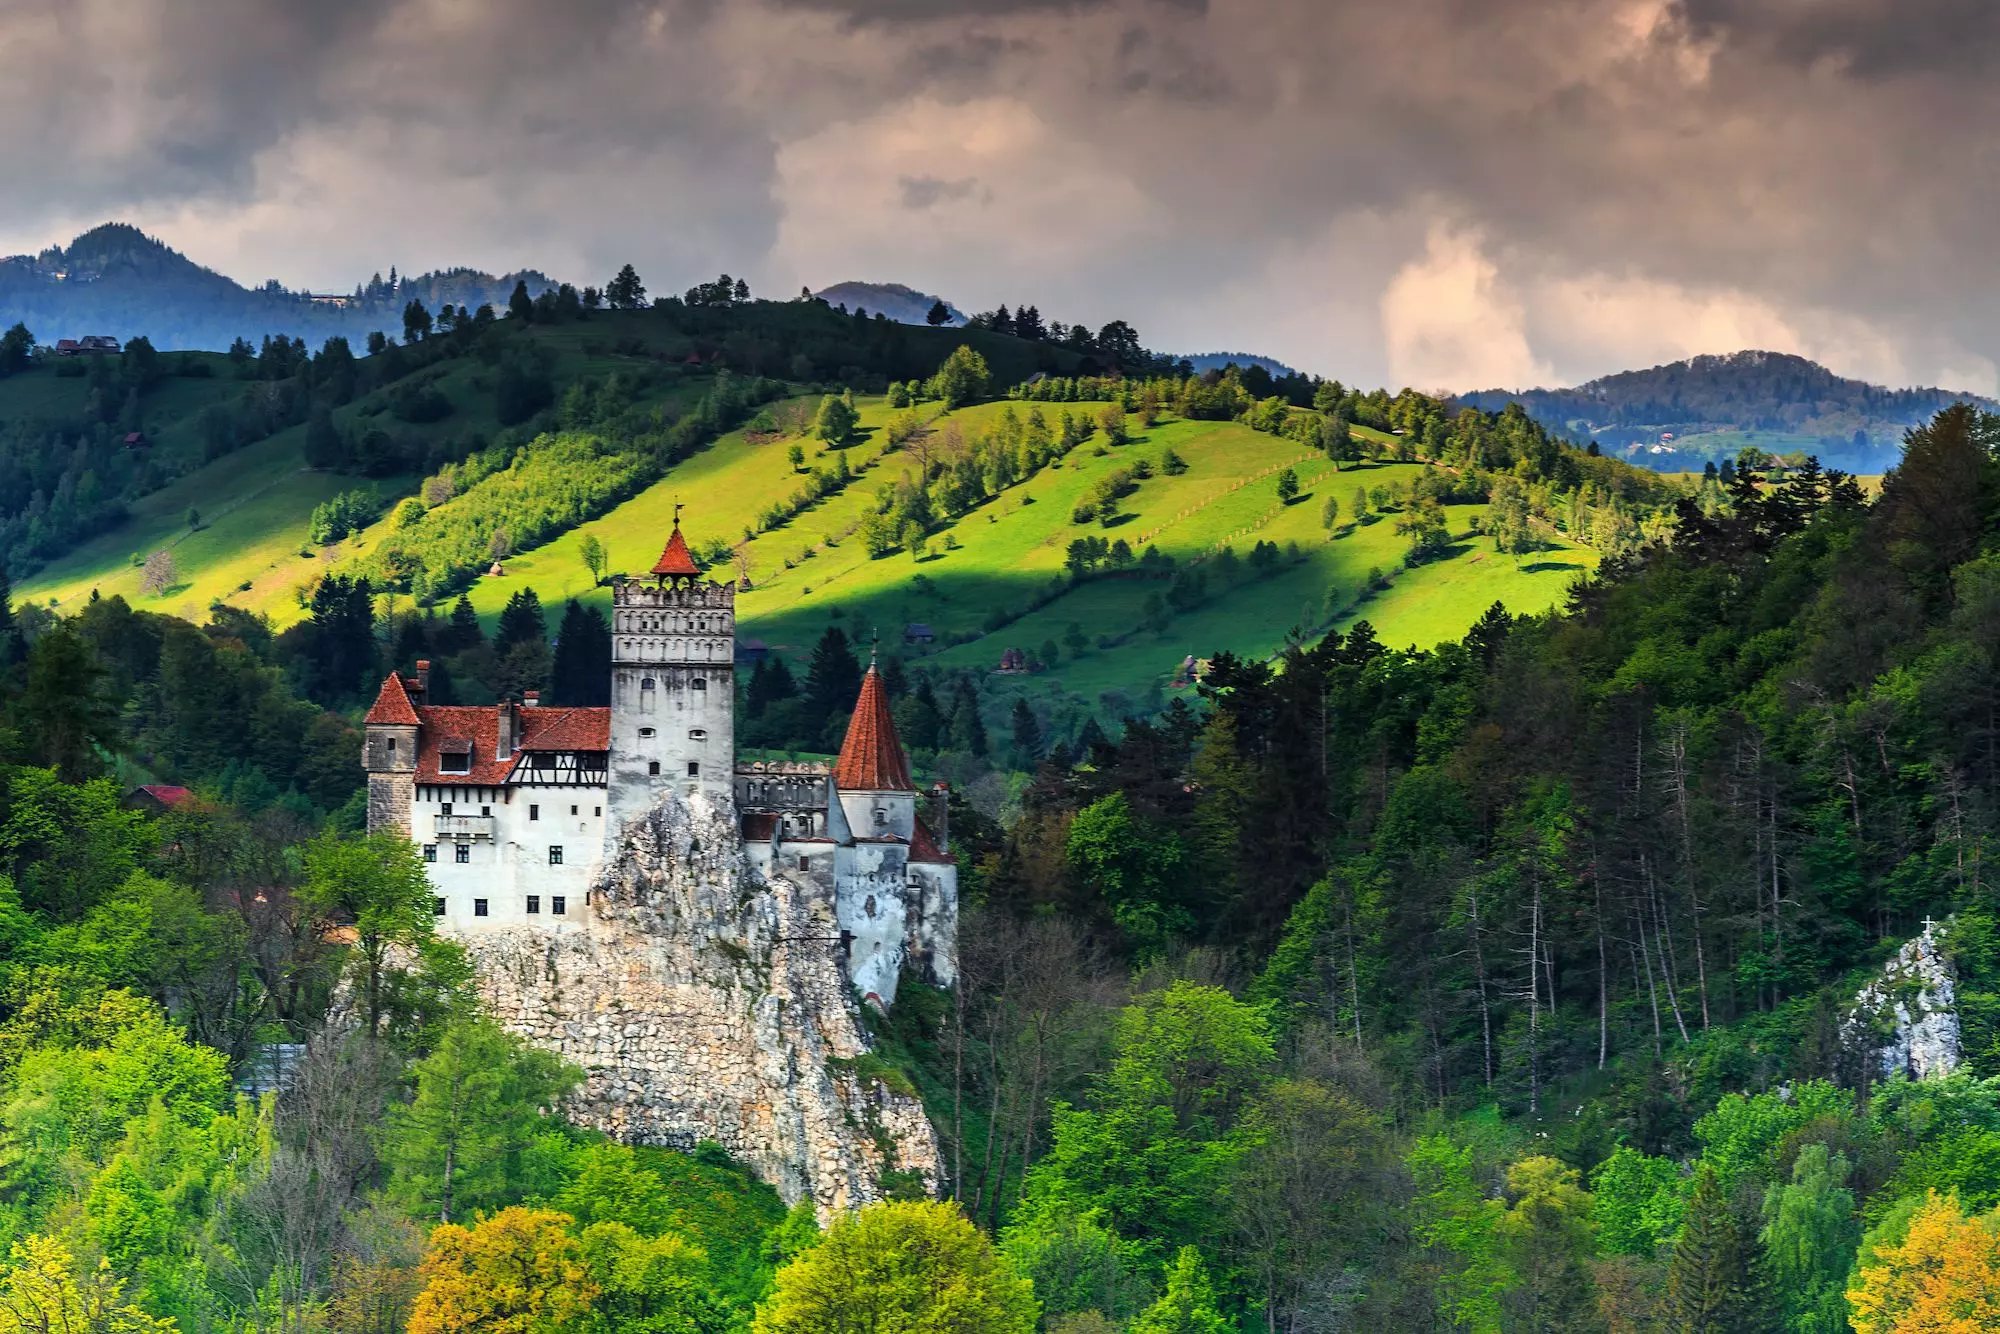 The Bran Castle ? – Maps, opening hours, prices, Dracula, etc.